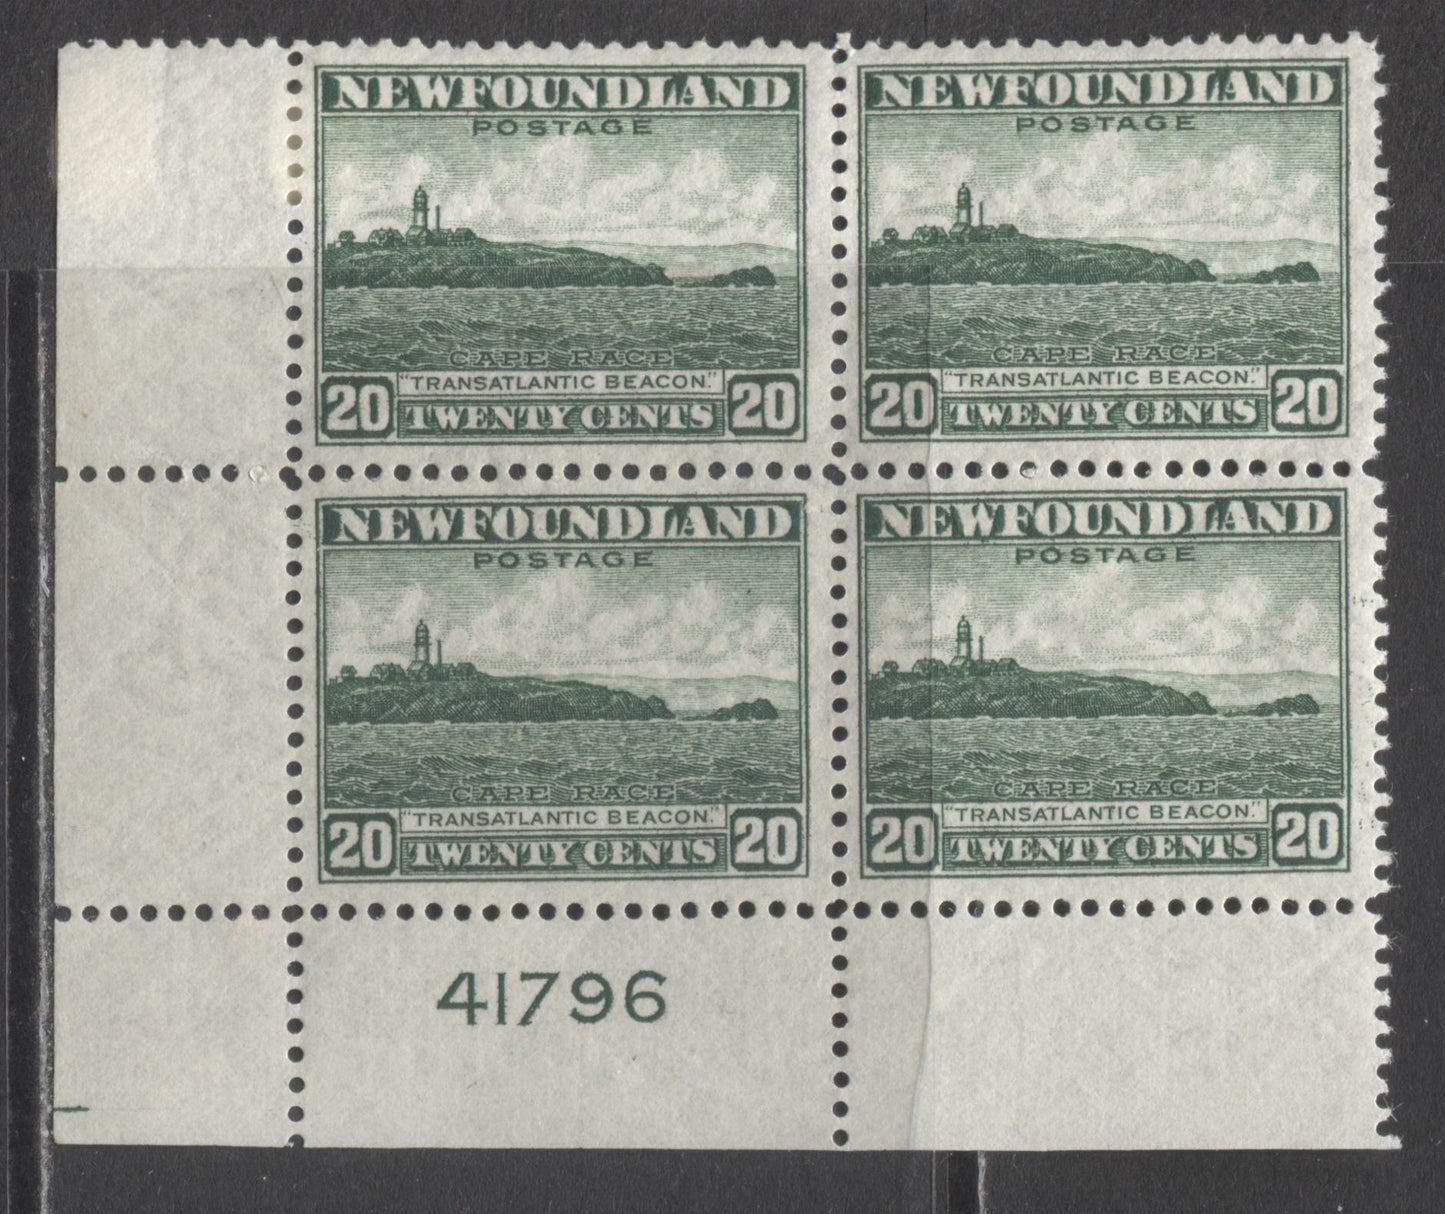 Lot 235 Newfoundland #263 20c Green Cape Race, 1941-1944 Resources Re-Issue, A FNH LL Plate 41796 Block Of 4